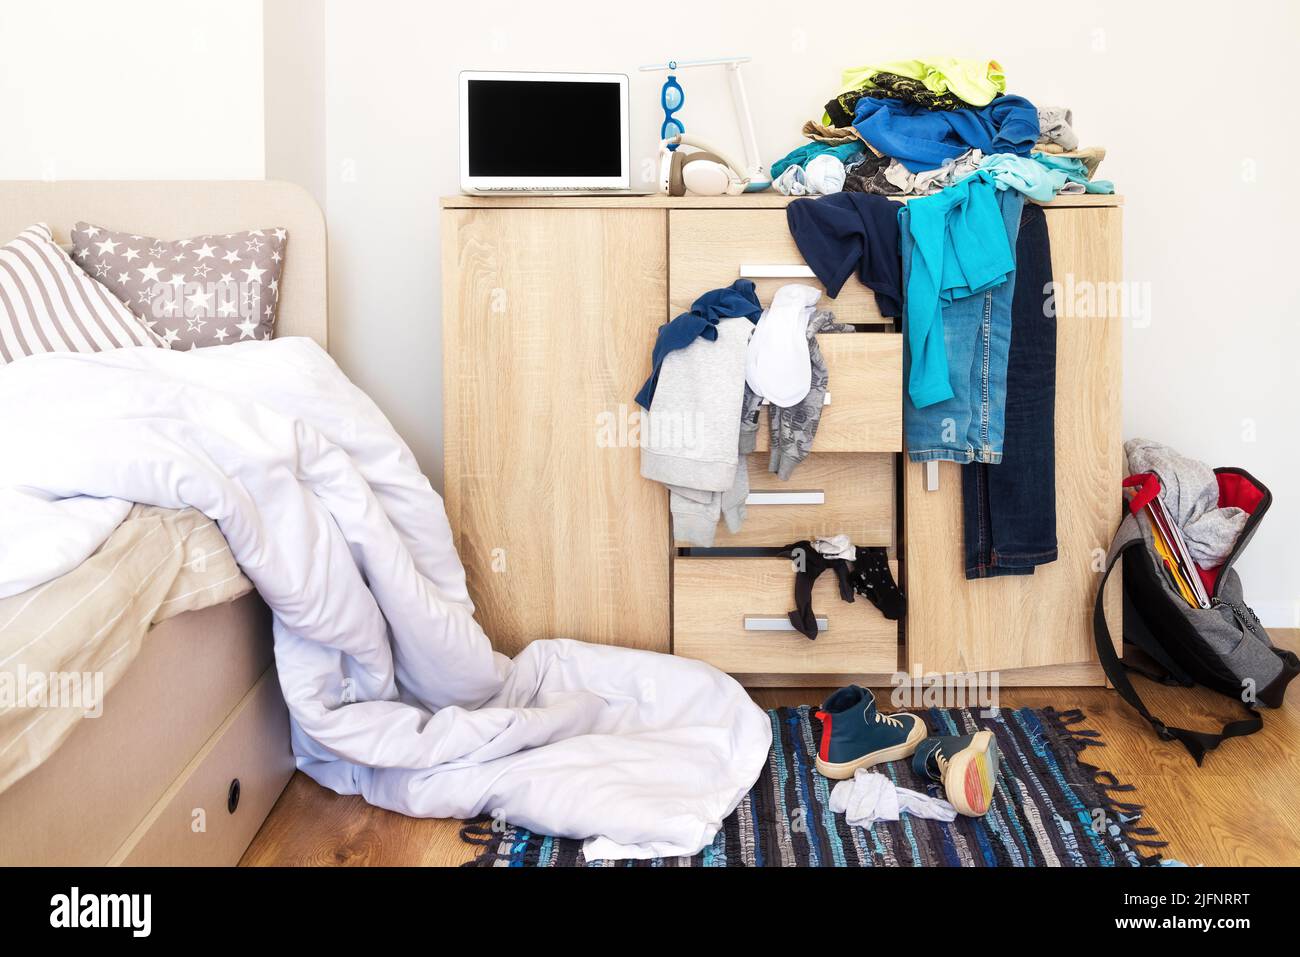 mess in a teenager's room. Clothes are strewn across the chest of drawers, floor Stock Photo